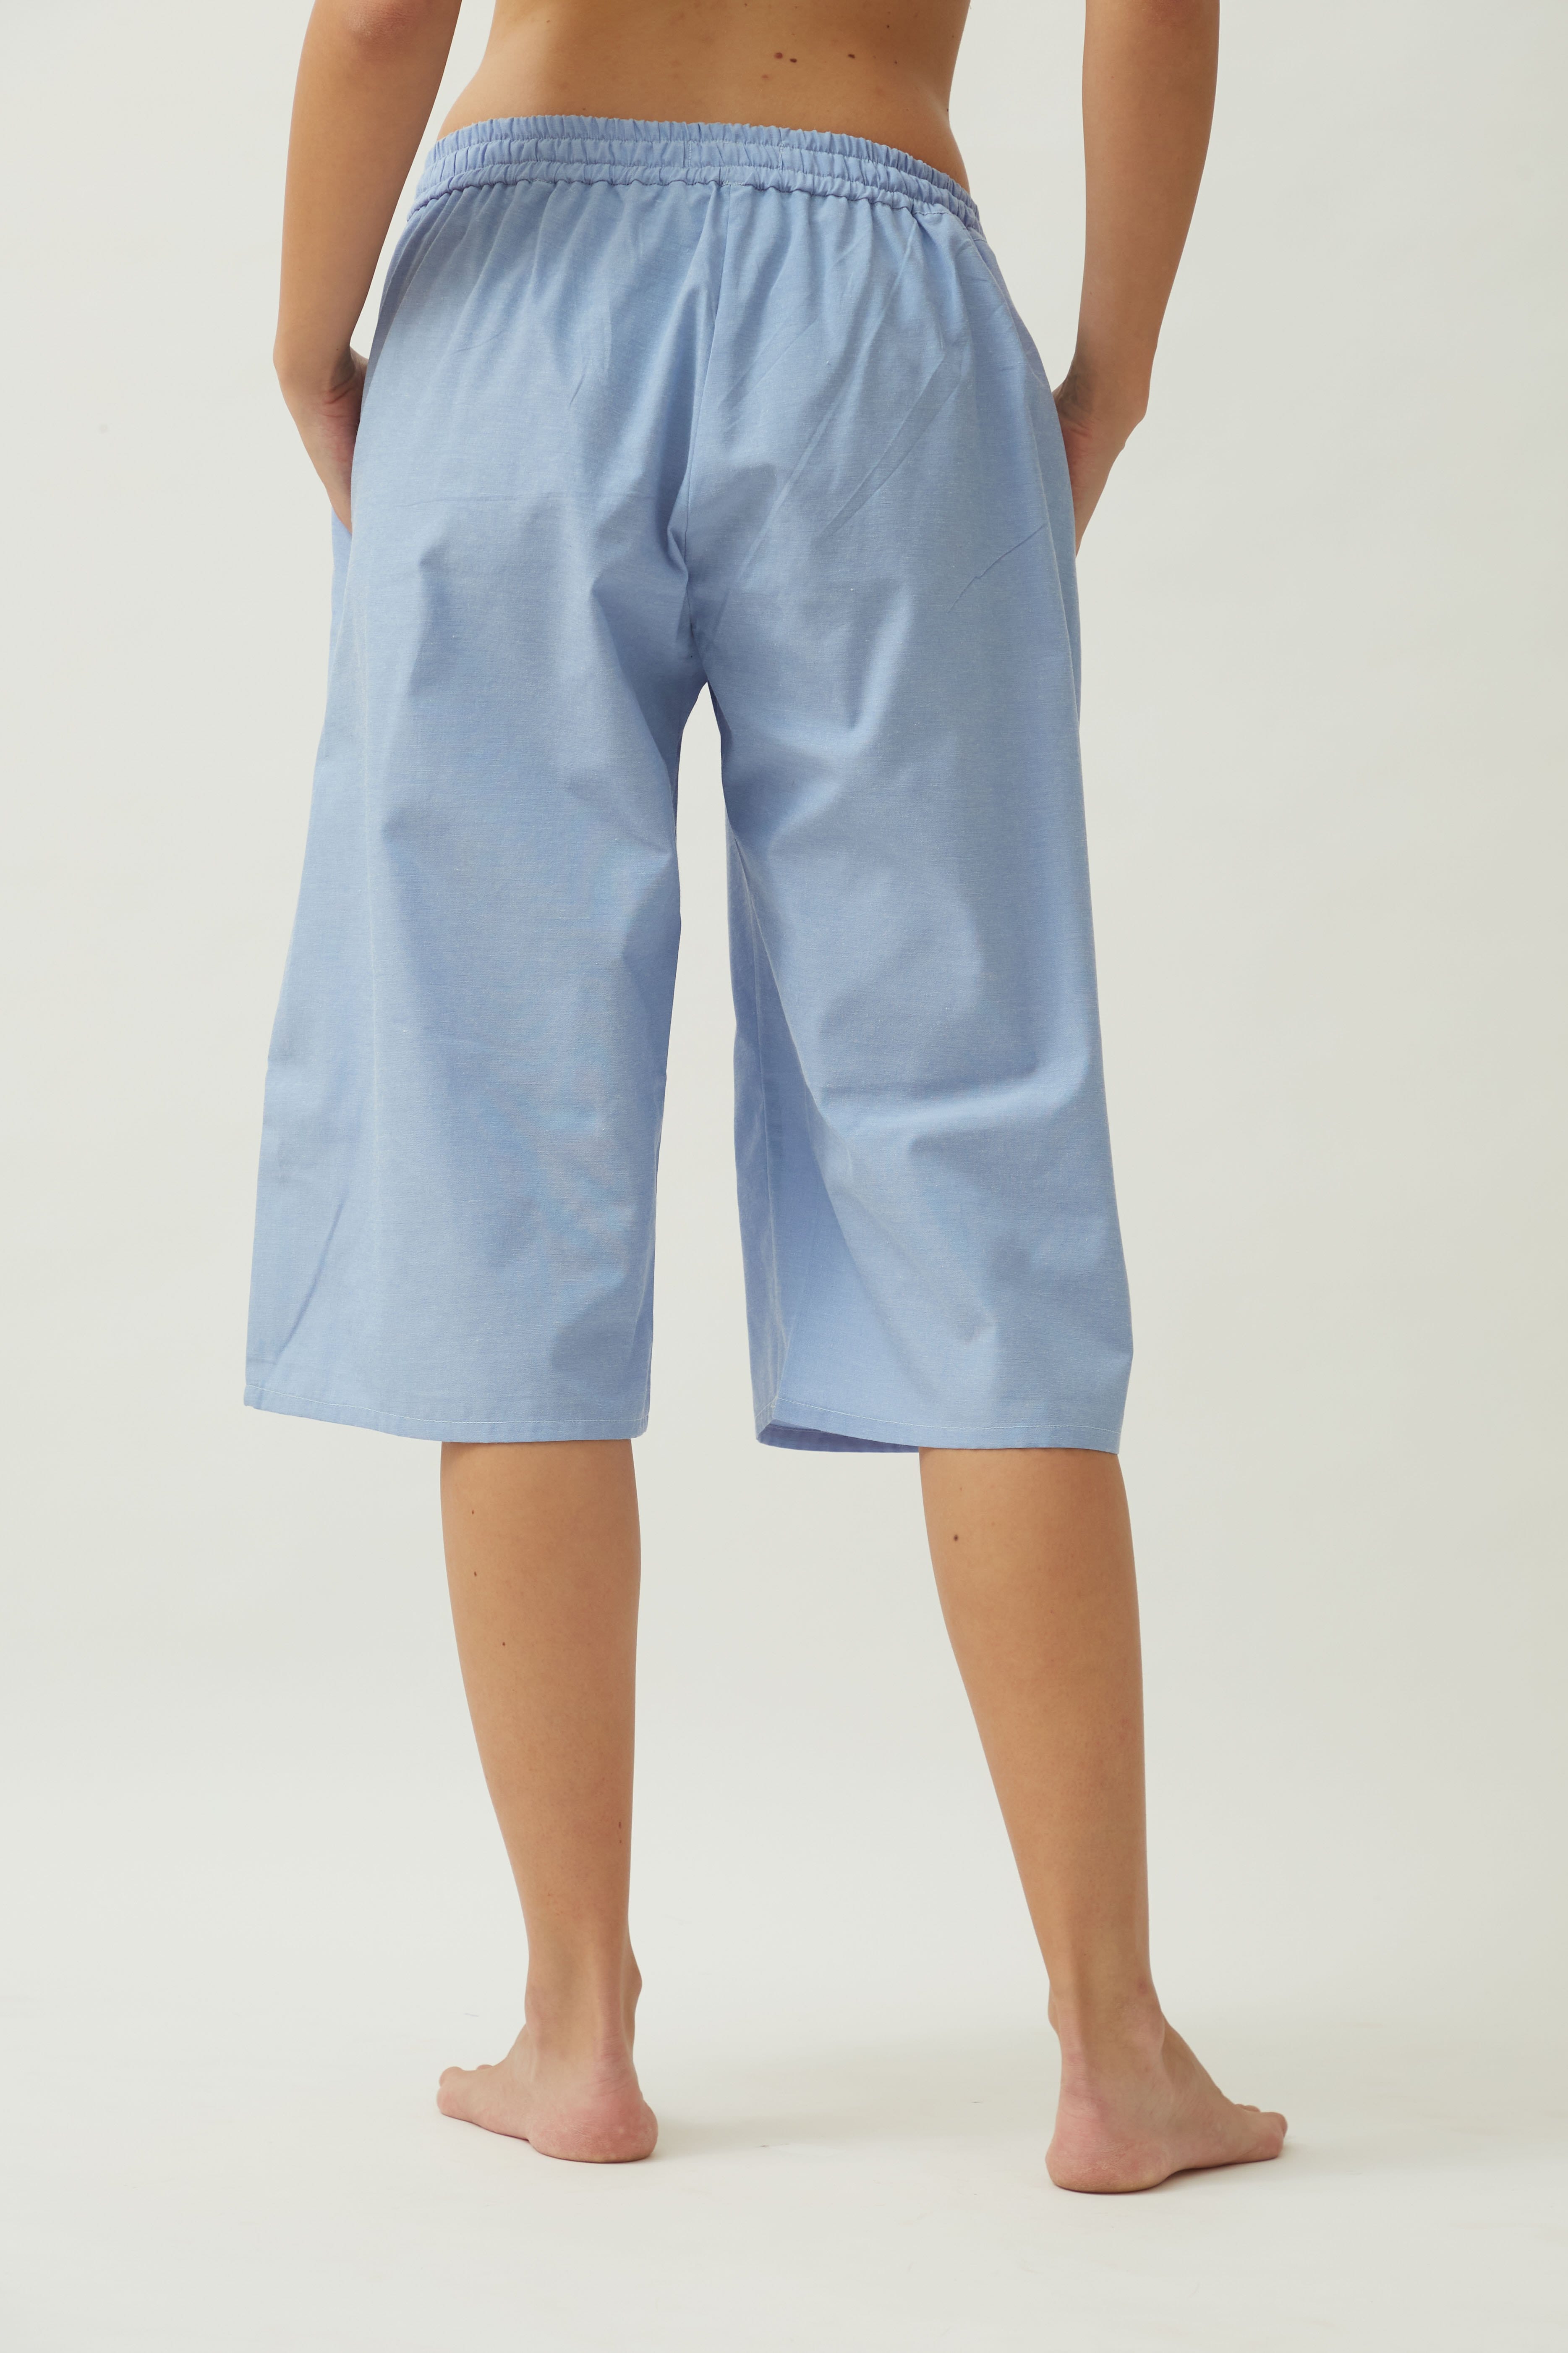 Saltpetre womens casual knee length culotte shorts with side pockets, in citadel blue in 100% organic cotton fabric.